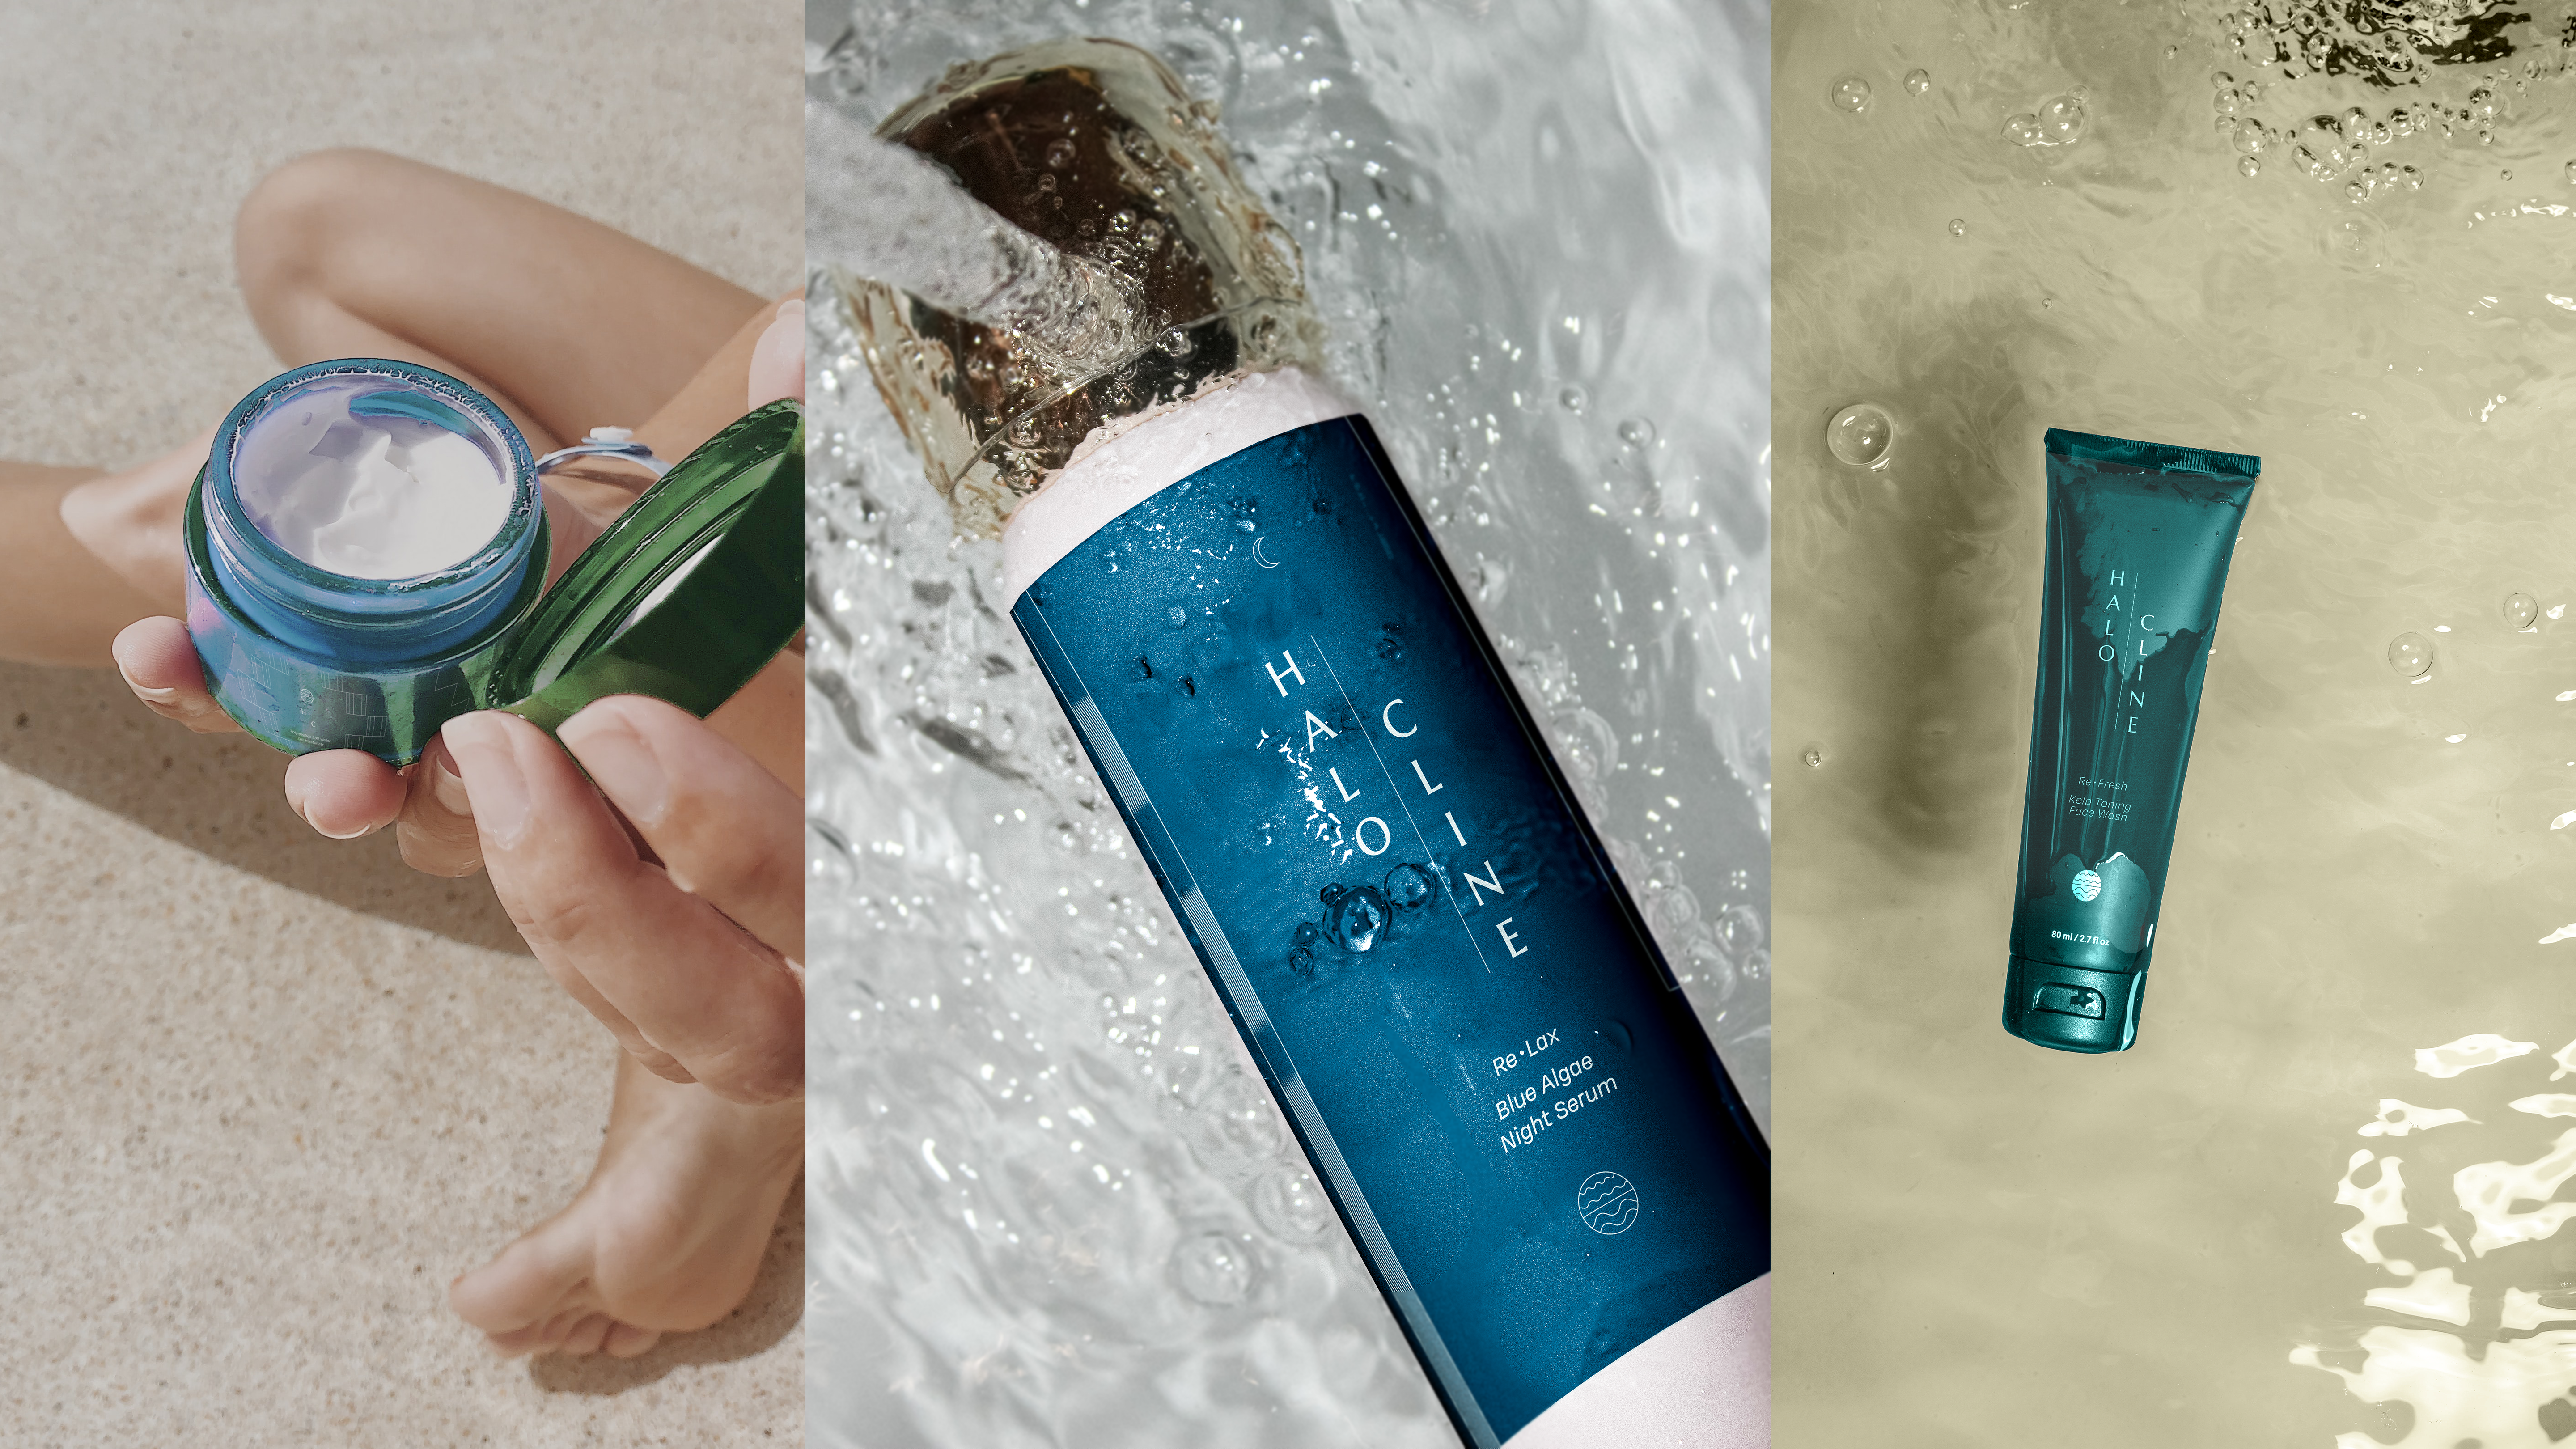 3 images are collaged together vertically. The first shows a woman’s hand opening a jar of moisturizer on a sandy beach. The jar is green, blue, and pink iridescent, and is labelled “Polypeptide Salt Water Gel Moisturizer.” The jar has fine, art-deco inspired graphic lines covering the outside. The second image is a serum bottle being submerged under a stream of tap water. The bottle is dark blue, with the same lines as the jar. This time, it reads “Re-lax, Blue Algae Night Serum.” Lastly, a dark green squeeze tube of “Re-fresh Kelp Face Wash” sits on a shallow pool of sandy water.